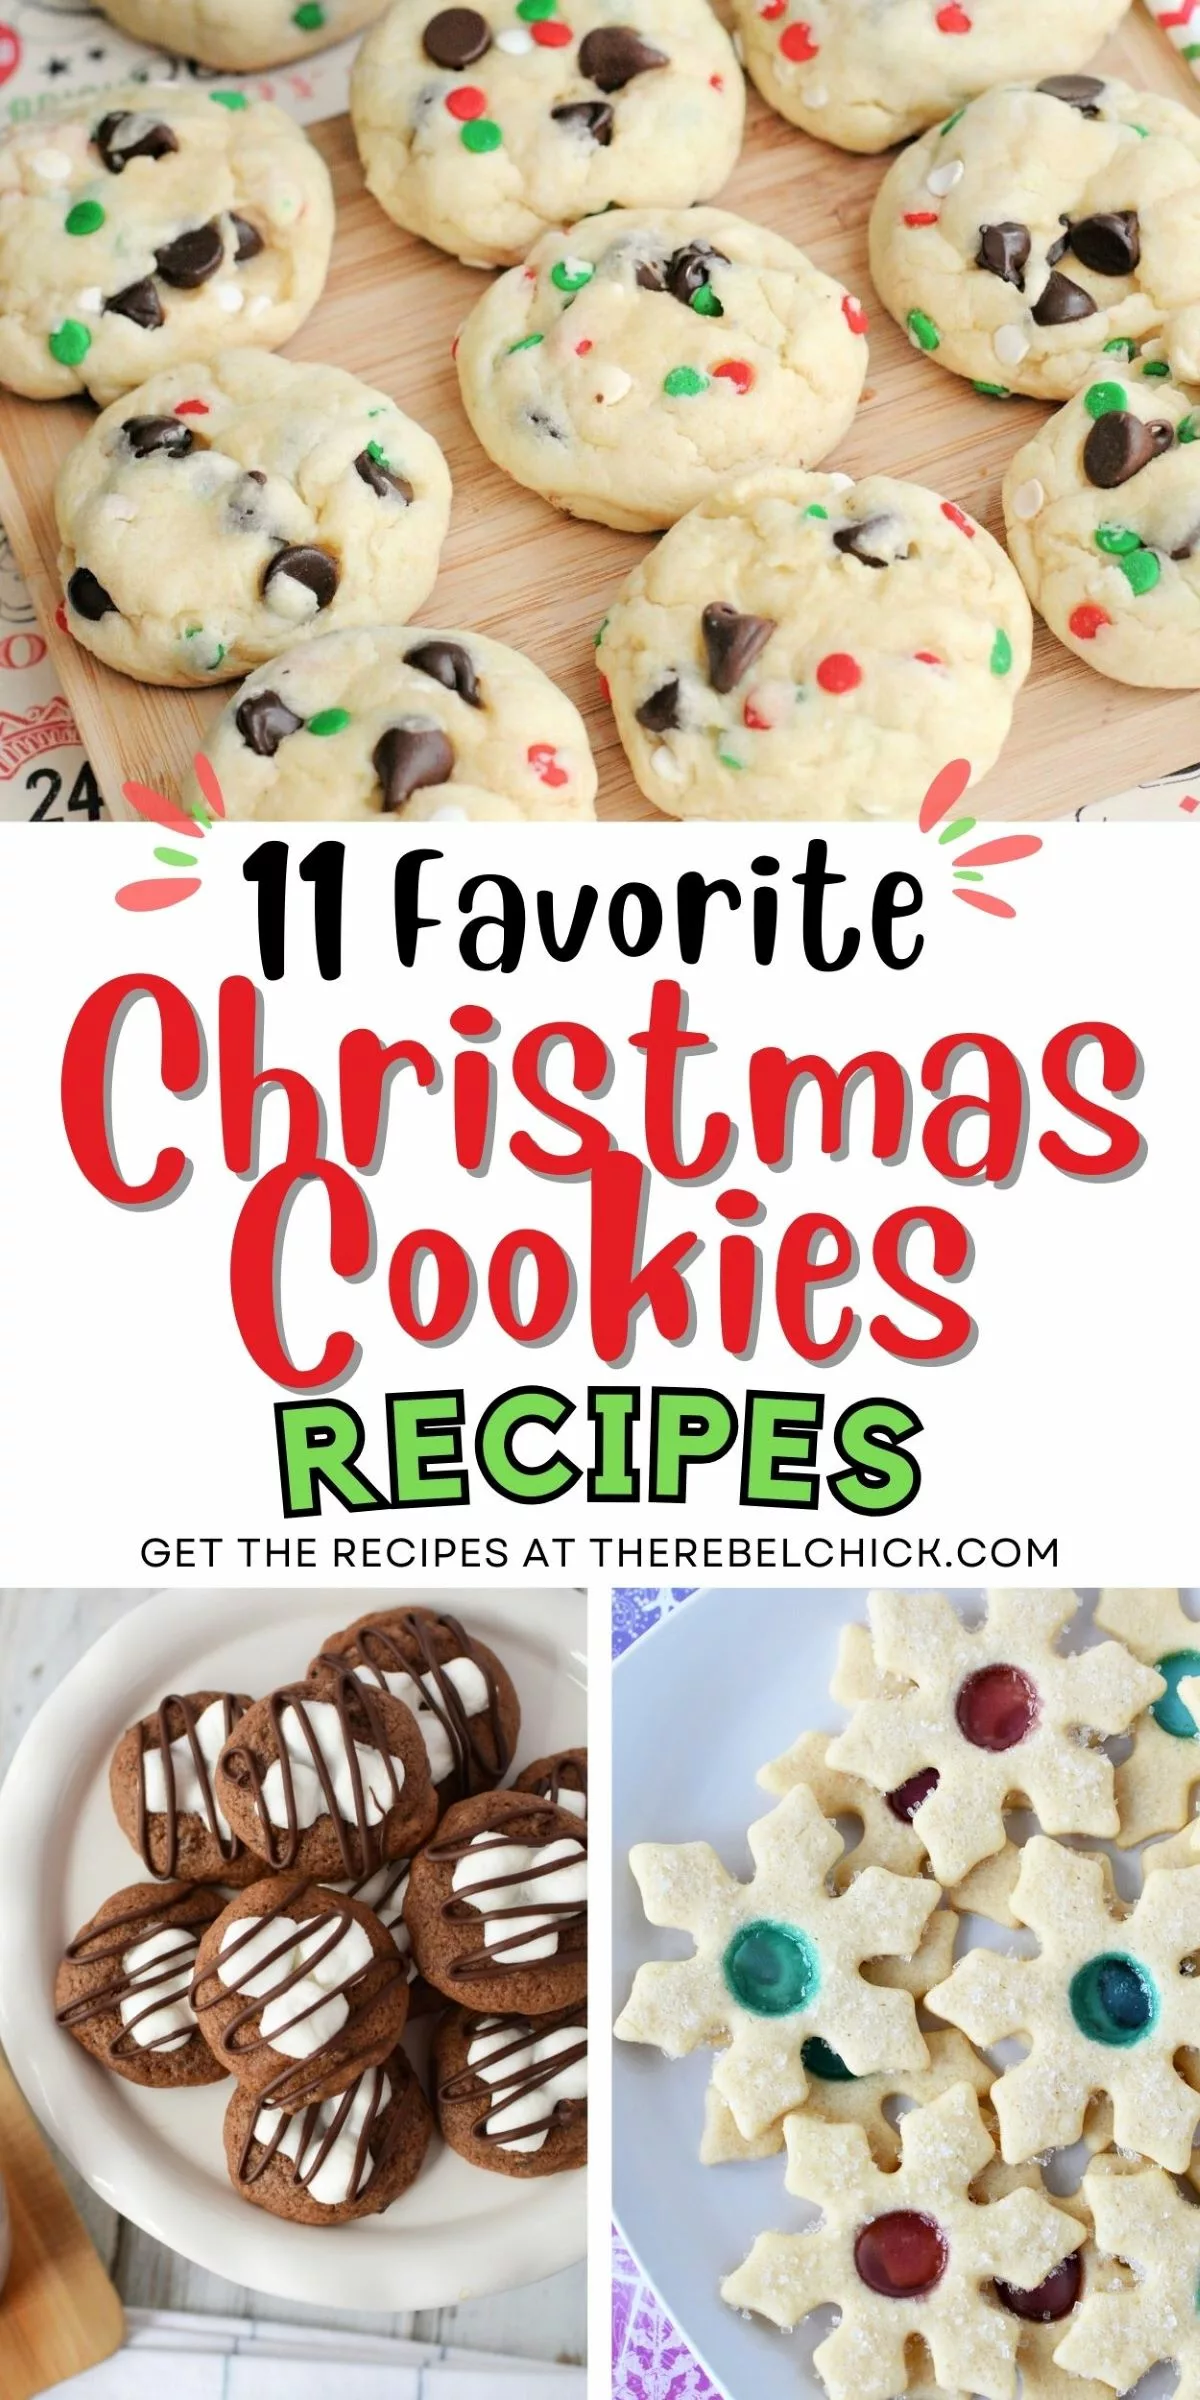 11 Favorite Christmas Cookies Recipes - The Rebel Chick